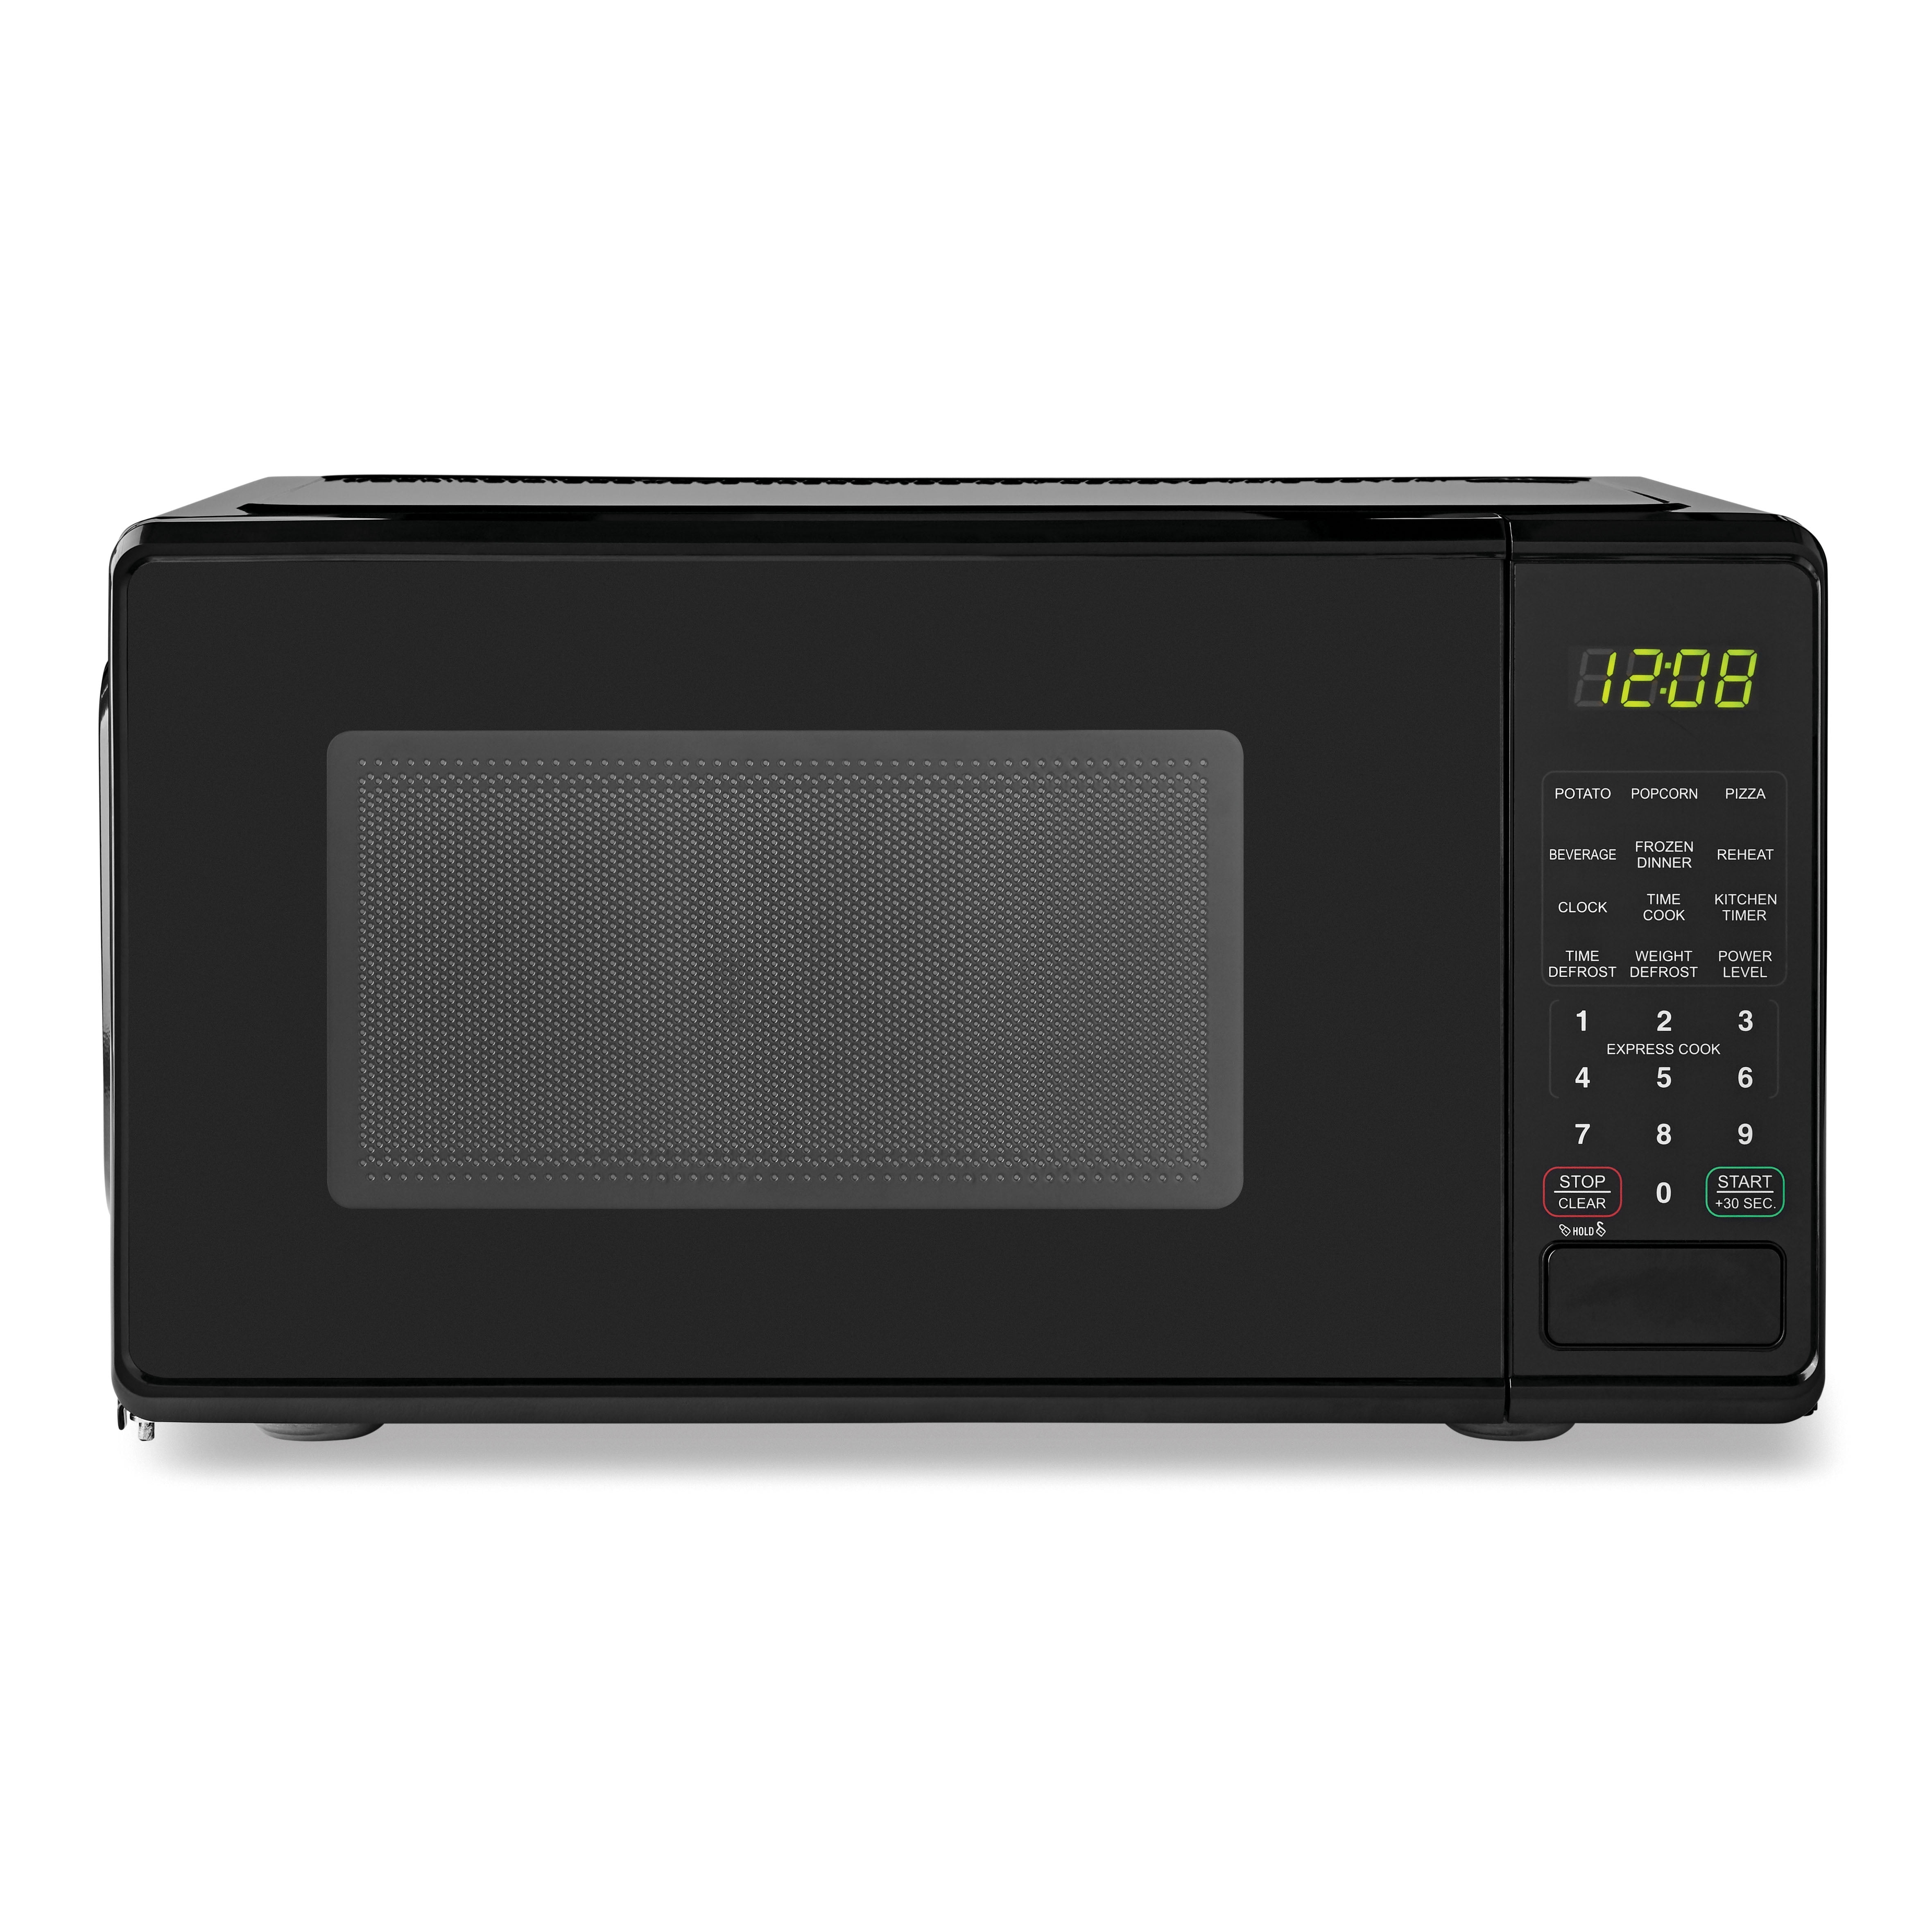 Free Cleaning Towel Black Mainstays 700W Output Microwave Oven 